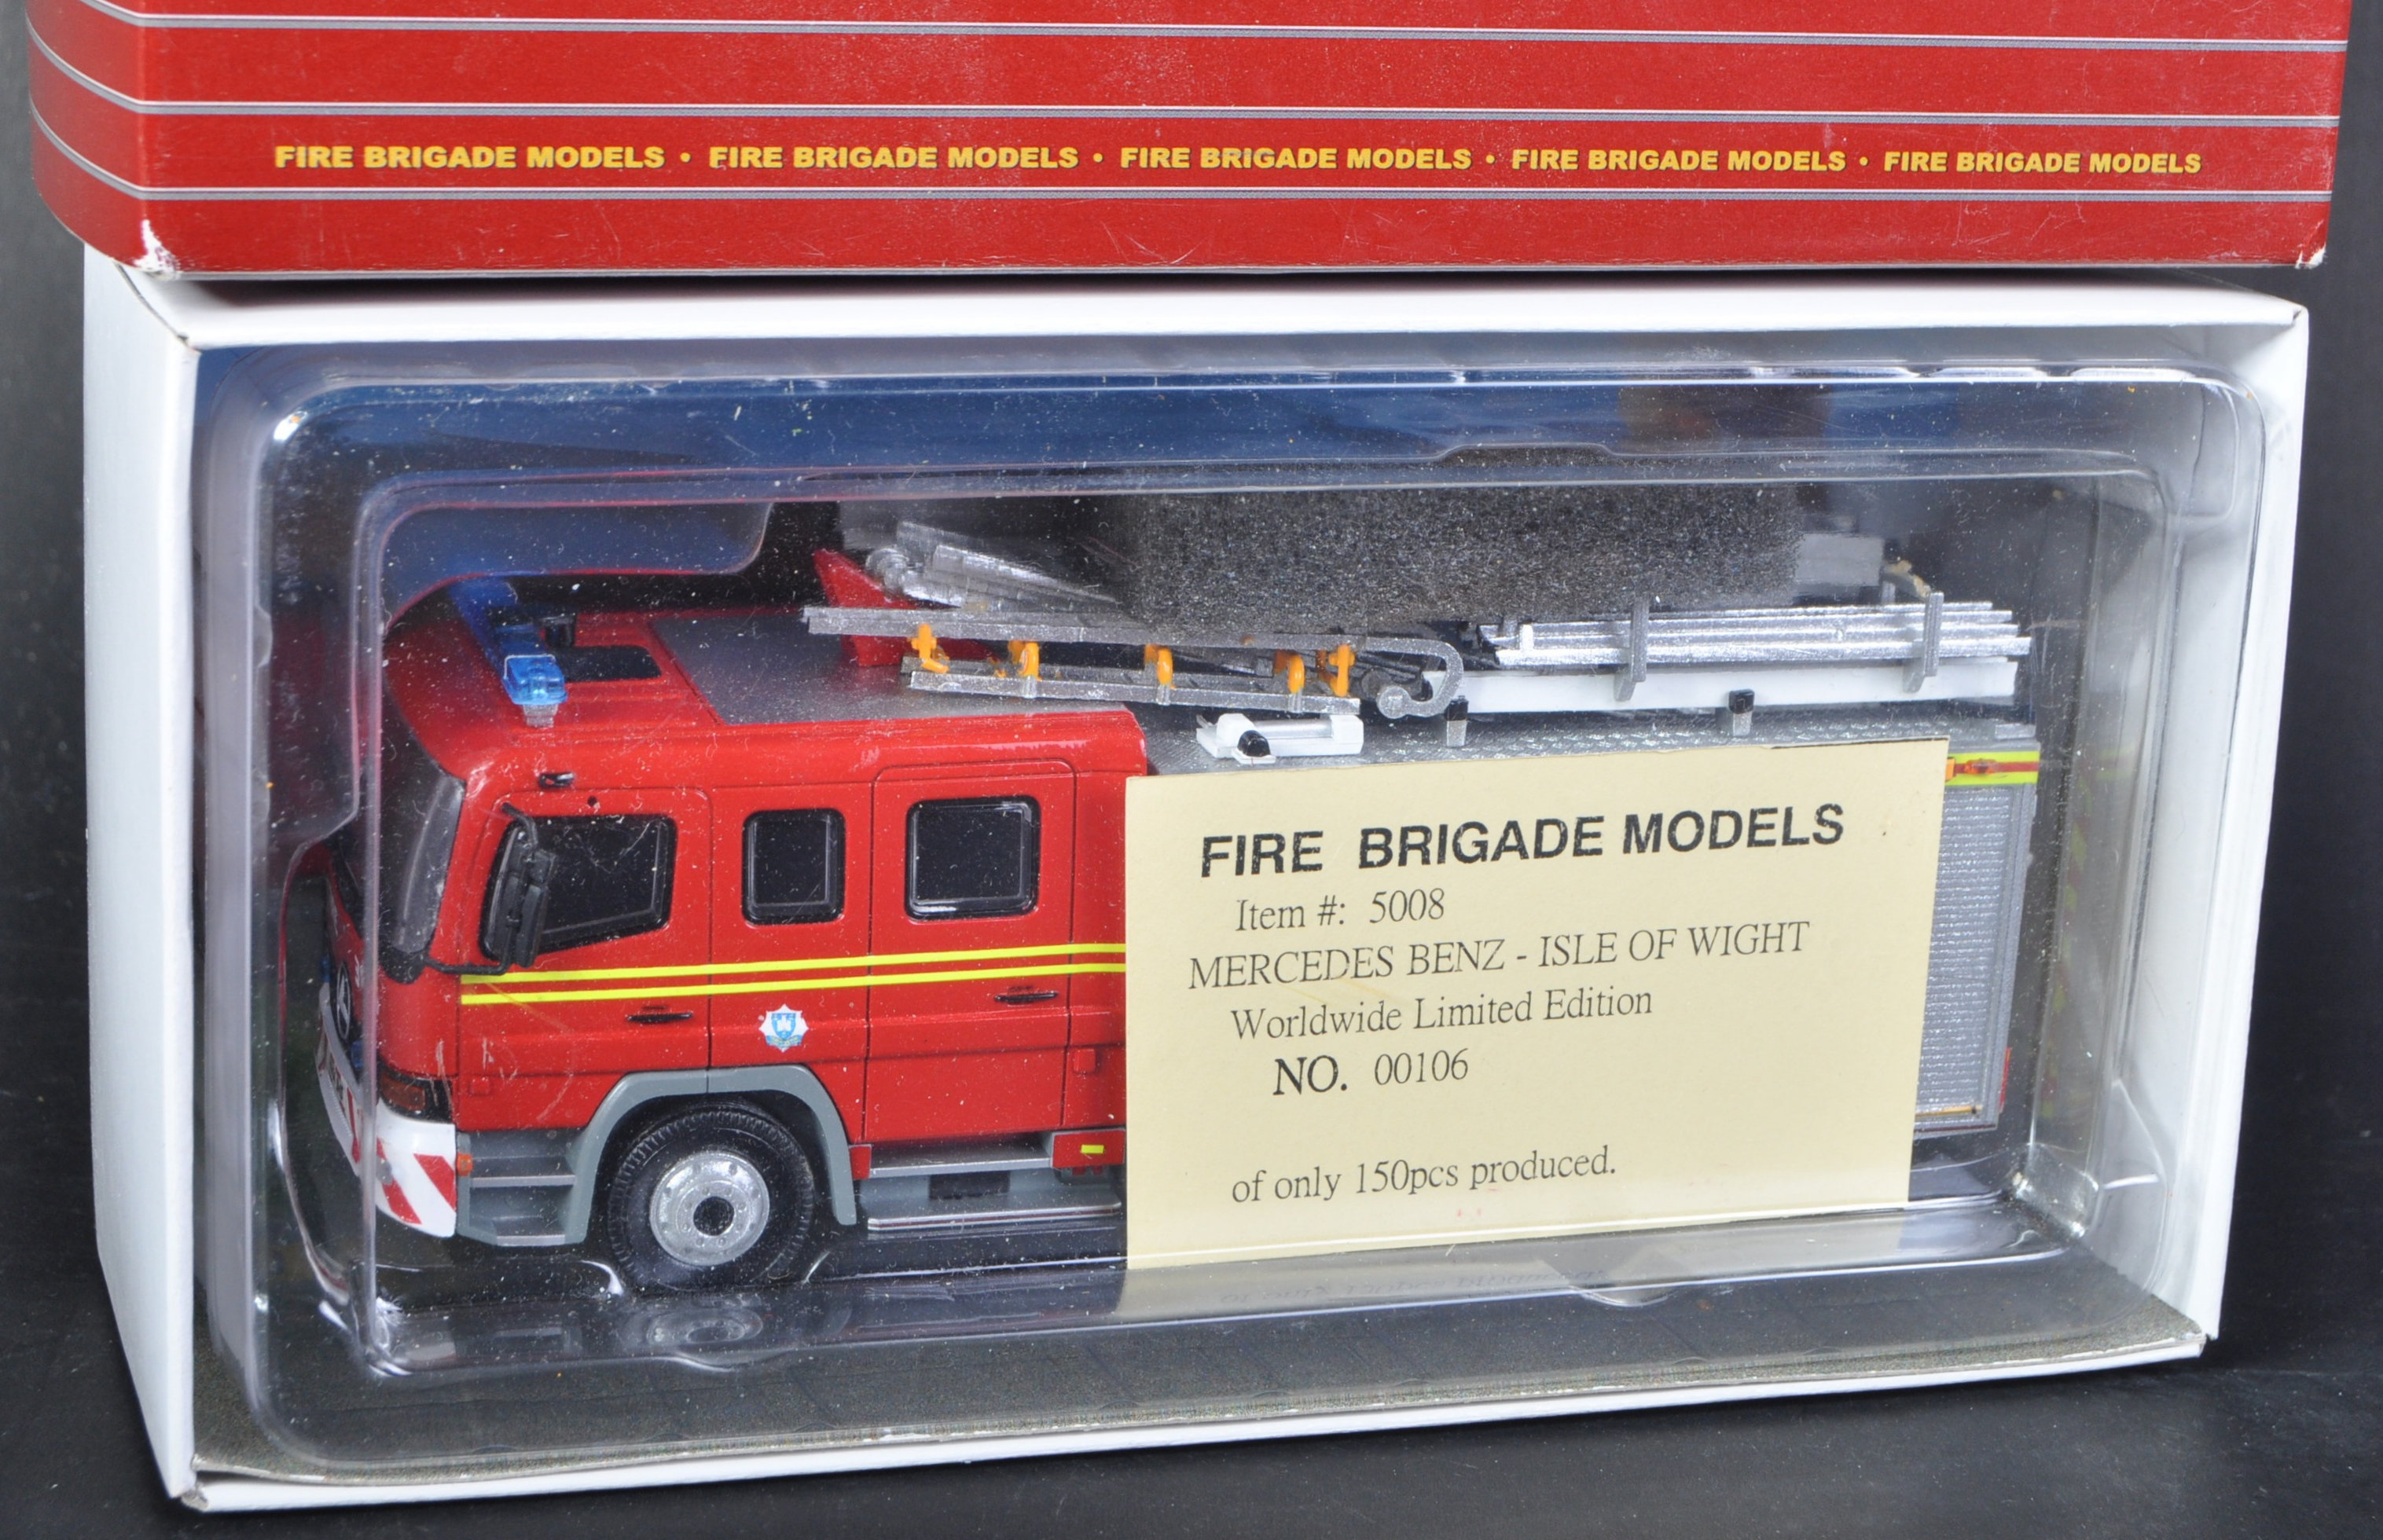 FIRE BRIGADE MODELS 1/50 SCALE DIECAST MODEL FIRE ENGINE - Image 3 of 6